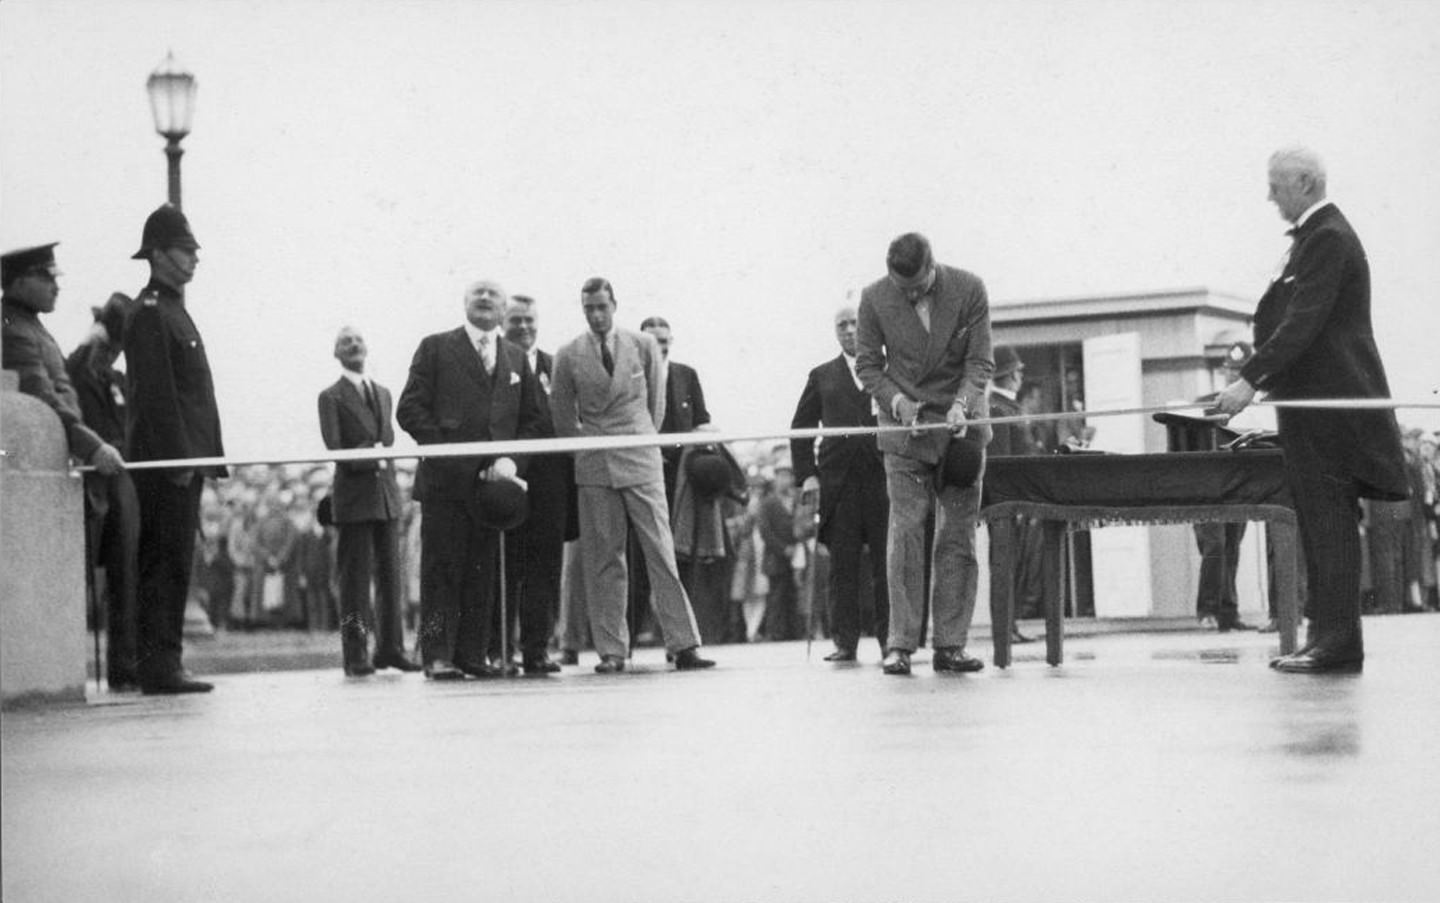 Cutting the ribbon at the formal opening ceremony for the CNE's Princes' Gates, Aug. 30, 1927.